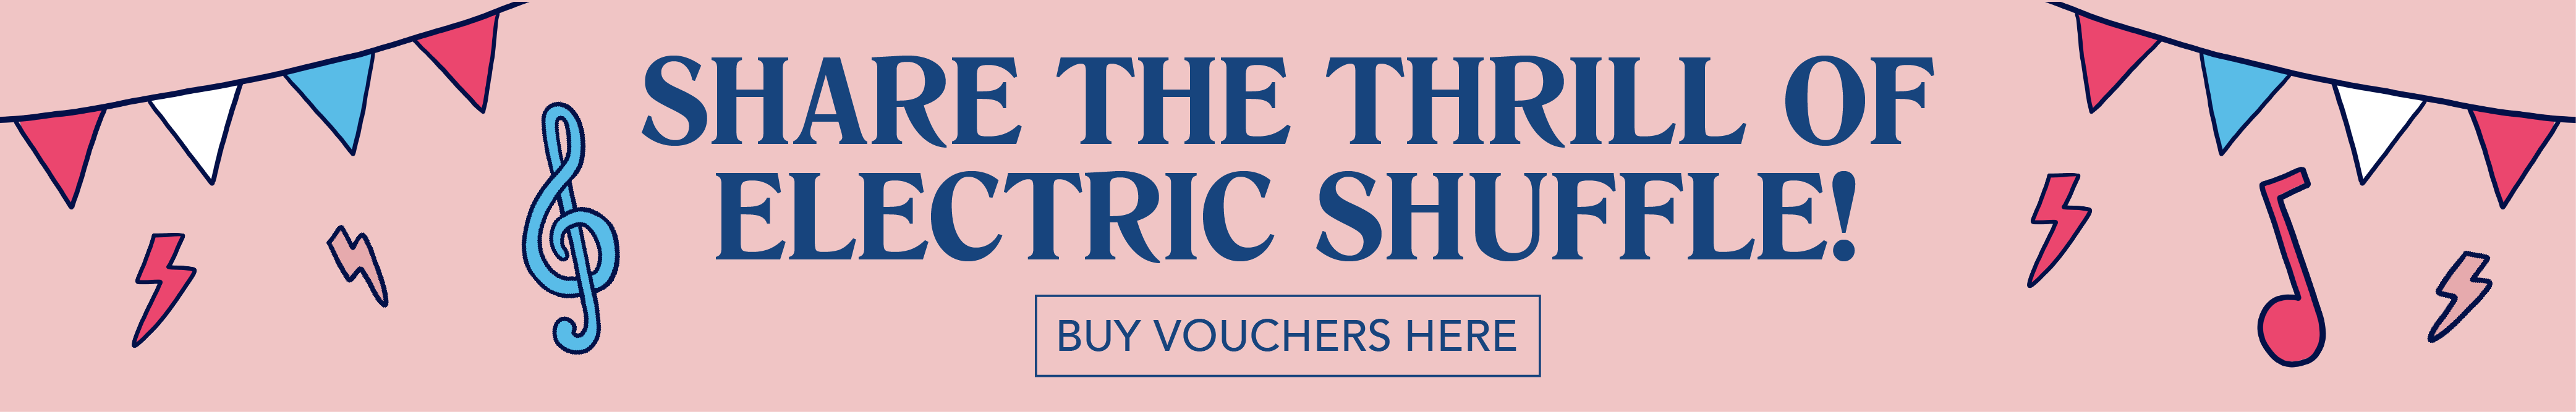 A banner for gift vouchers with the text "Share the thrill of Electric Shuffle, Buy vouchers here"